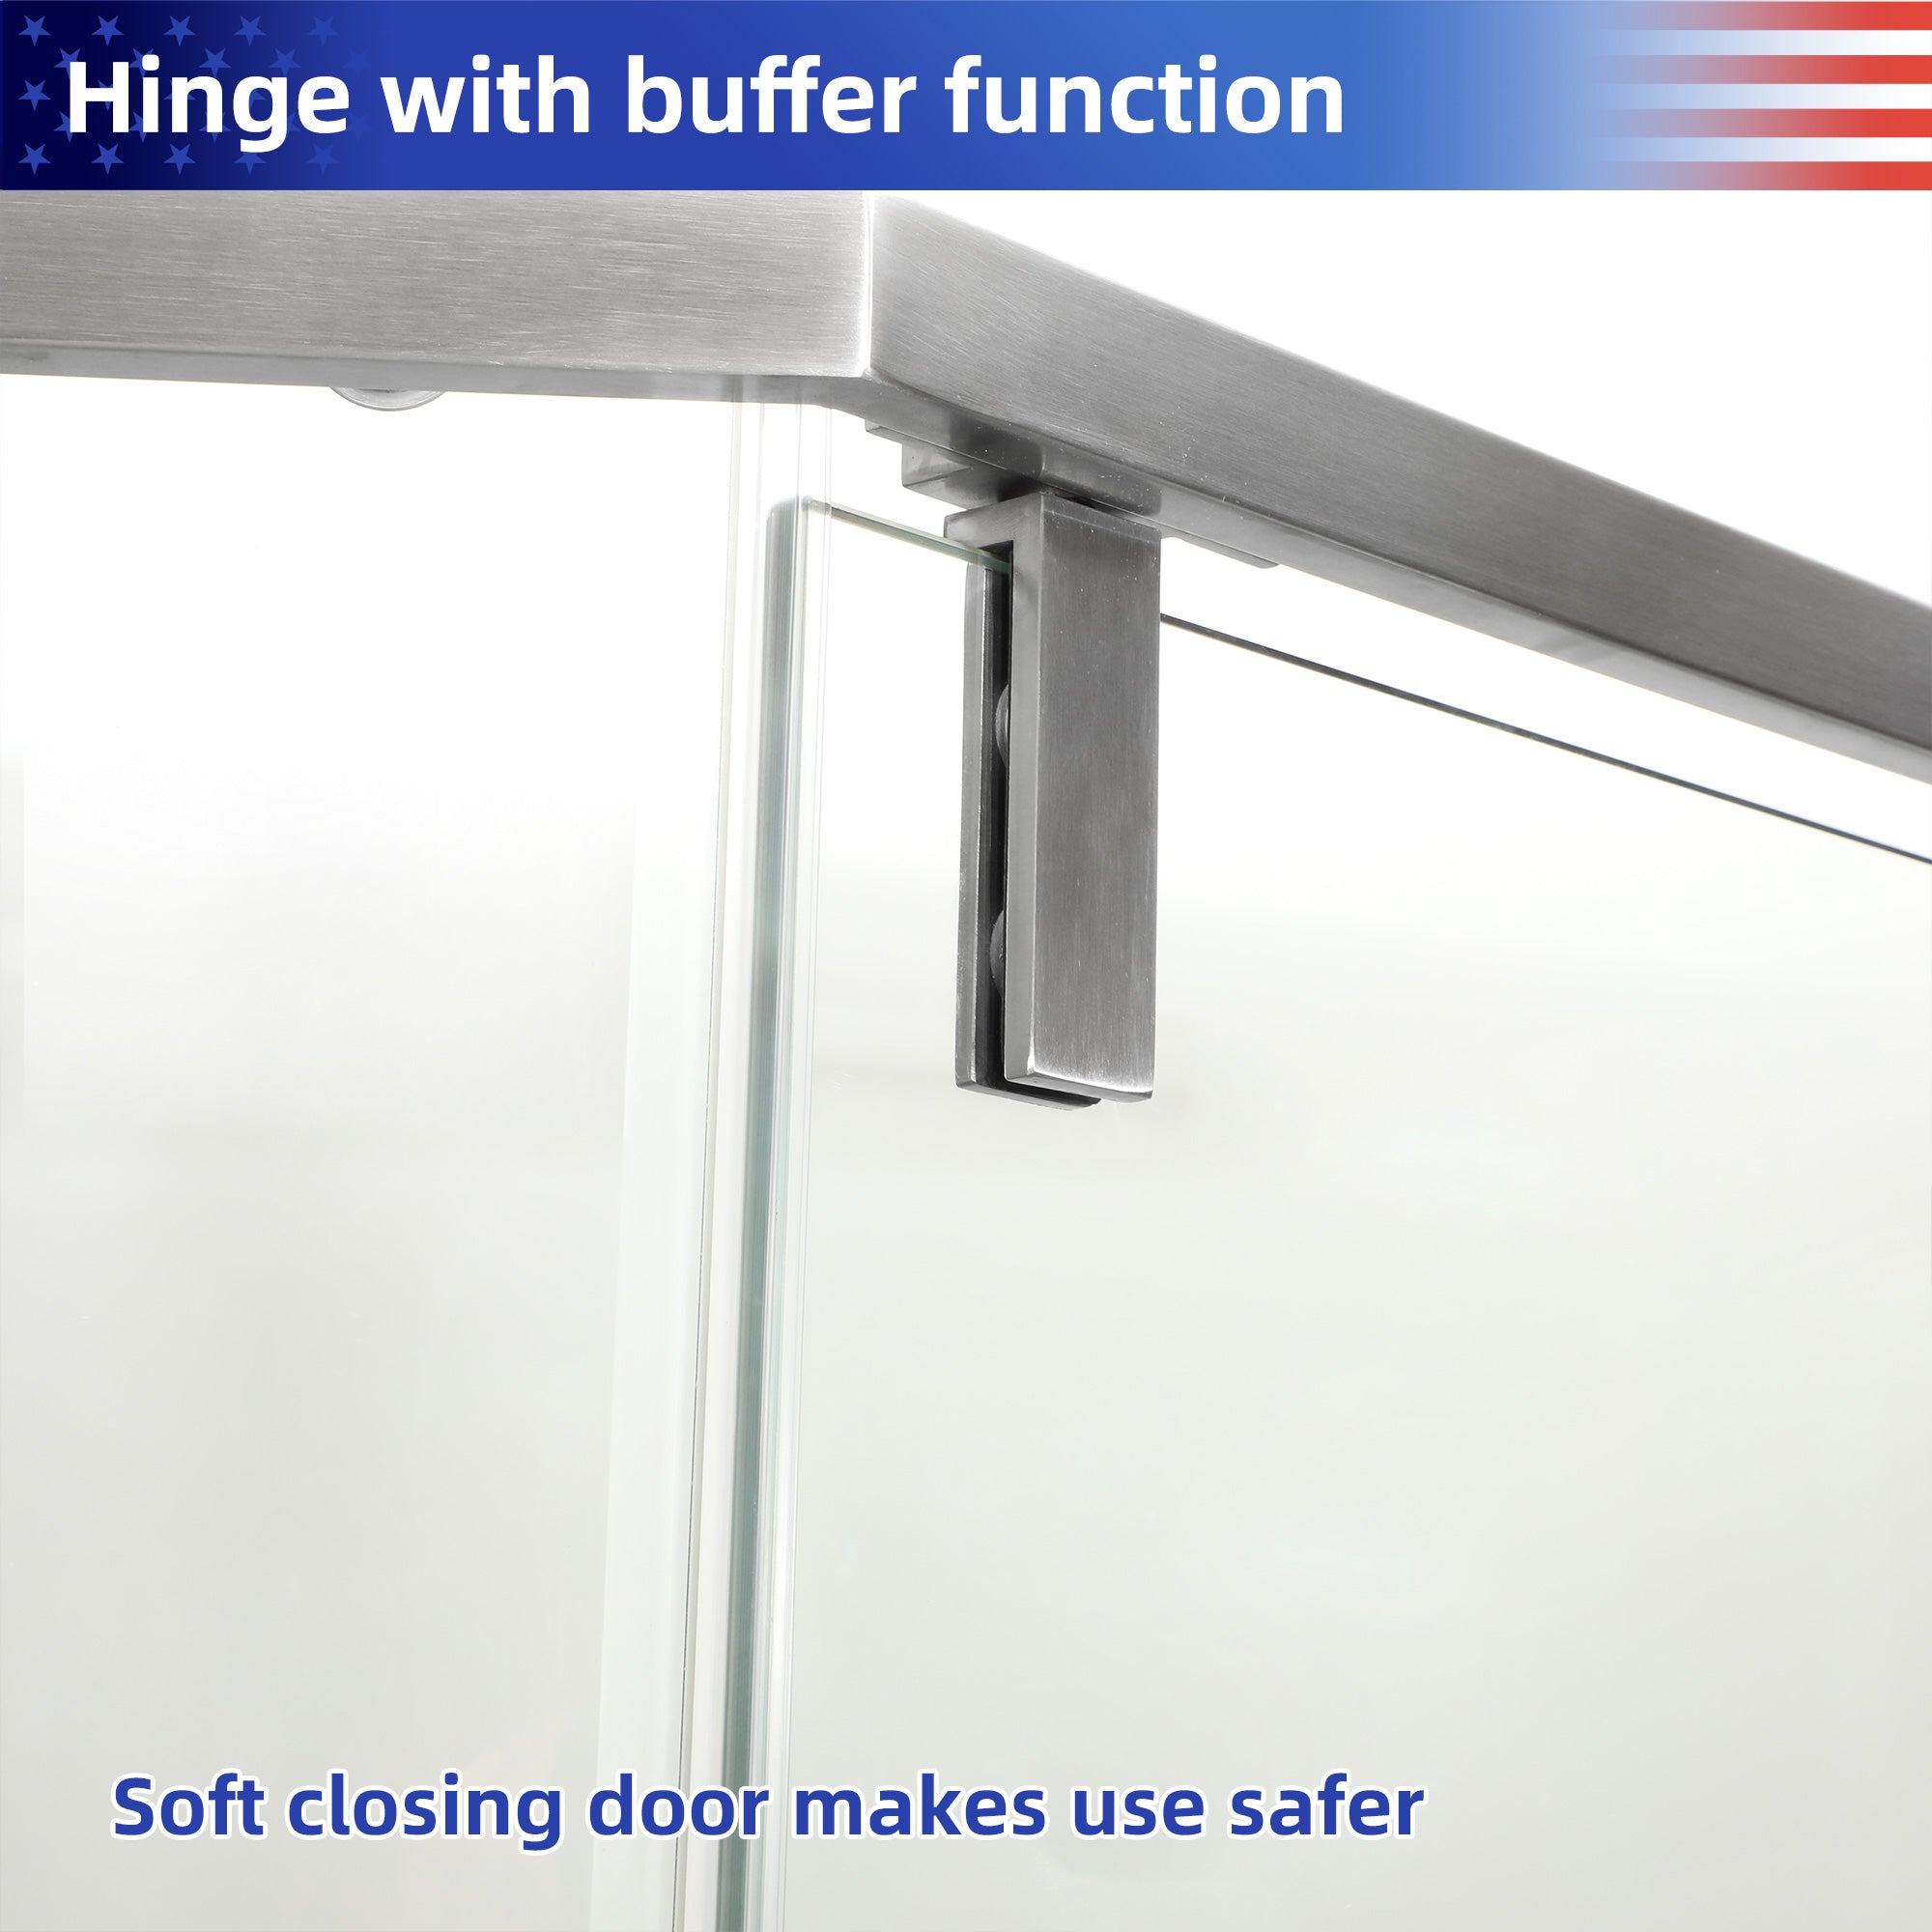 34-1/8" x 72" Semi-Frameless Neo-Angle Hinged Shower Enclosure in Brushed Nickel RX-SD06-3472BN